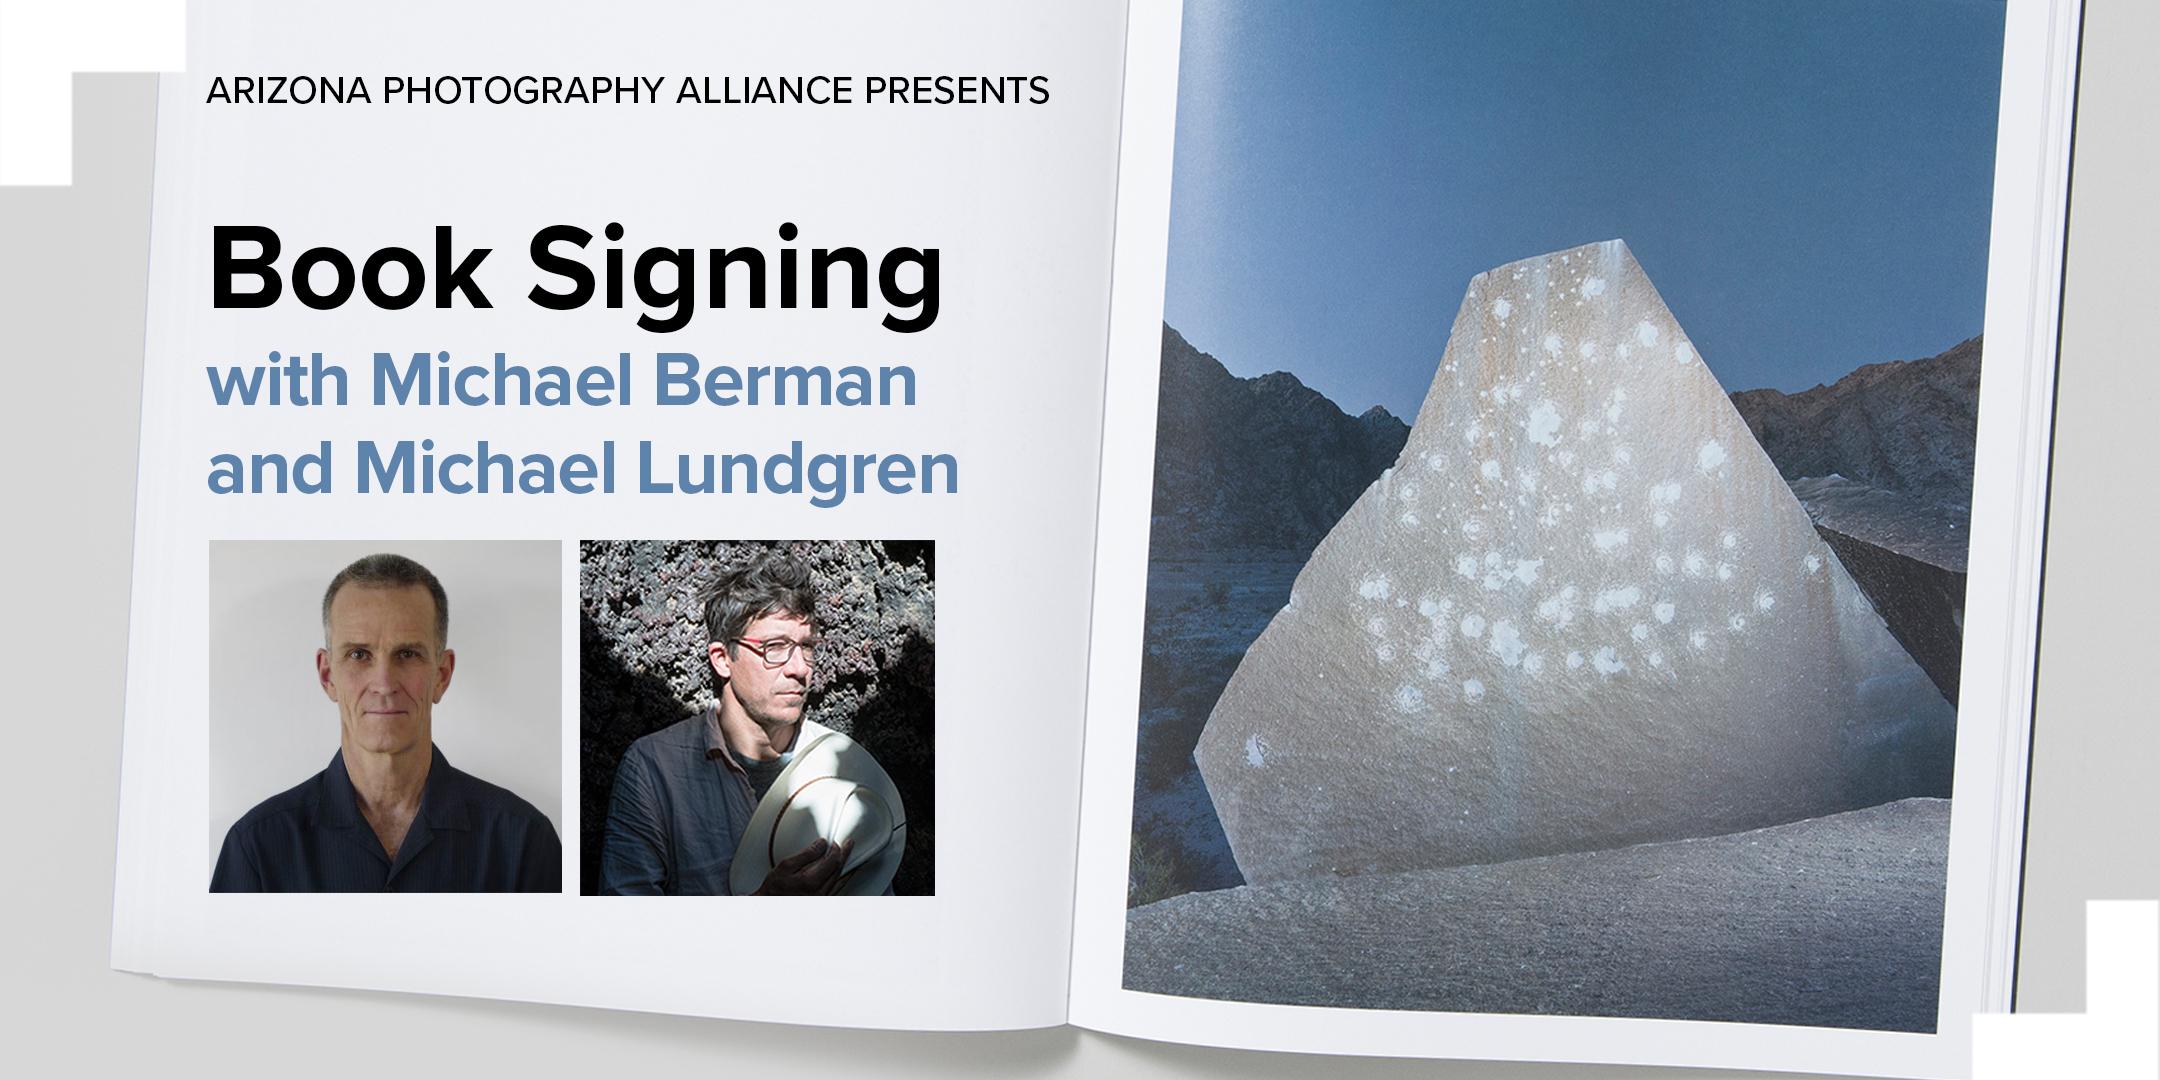 Book Signing with Michael Berman and Michael Lundgren